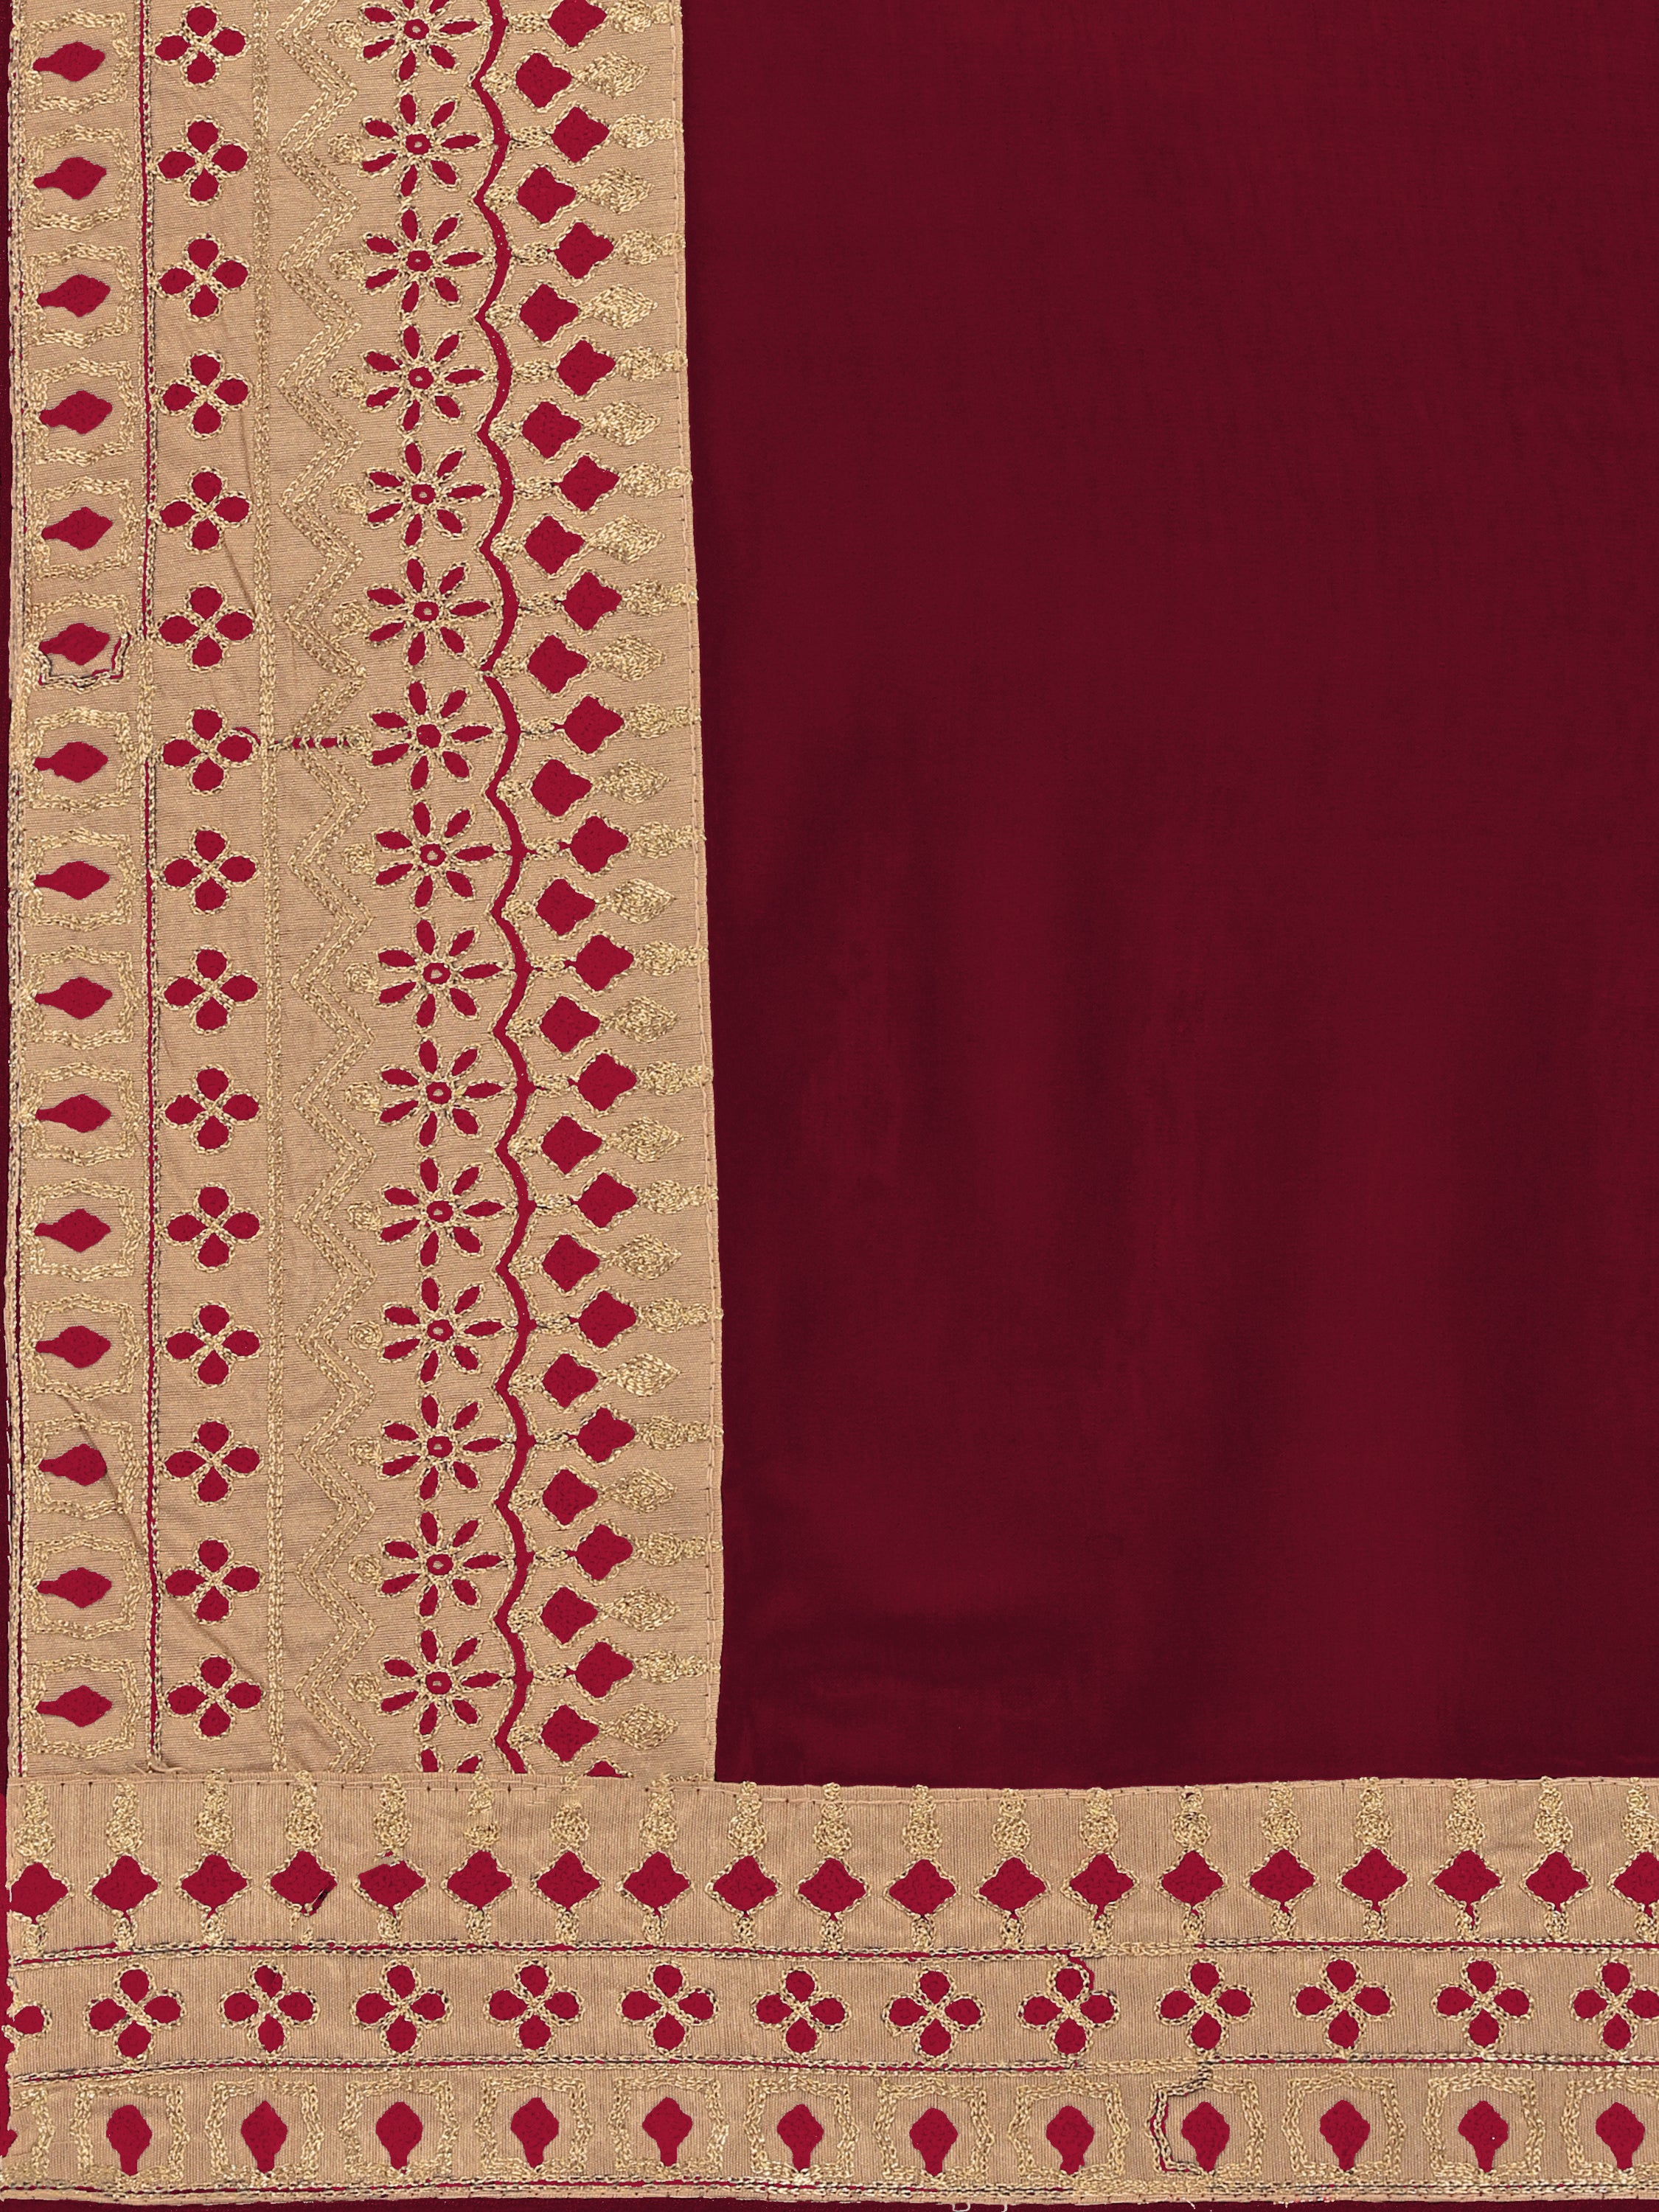 Women's self Woven Solid Occasion Wear Cotton Silk Embroided Heavy Border Sari With Blouse Piece (Maroon) - NIMIDHYA